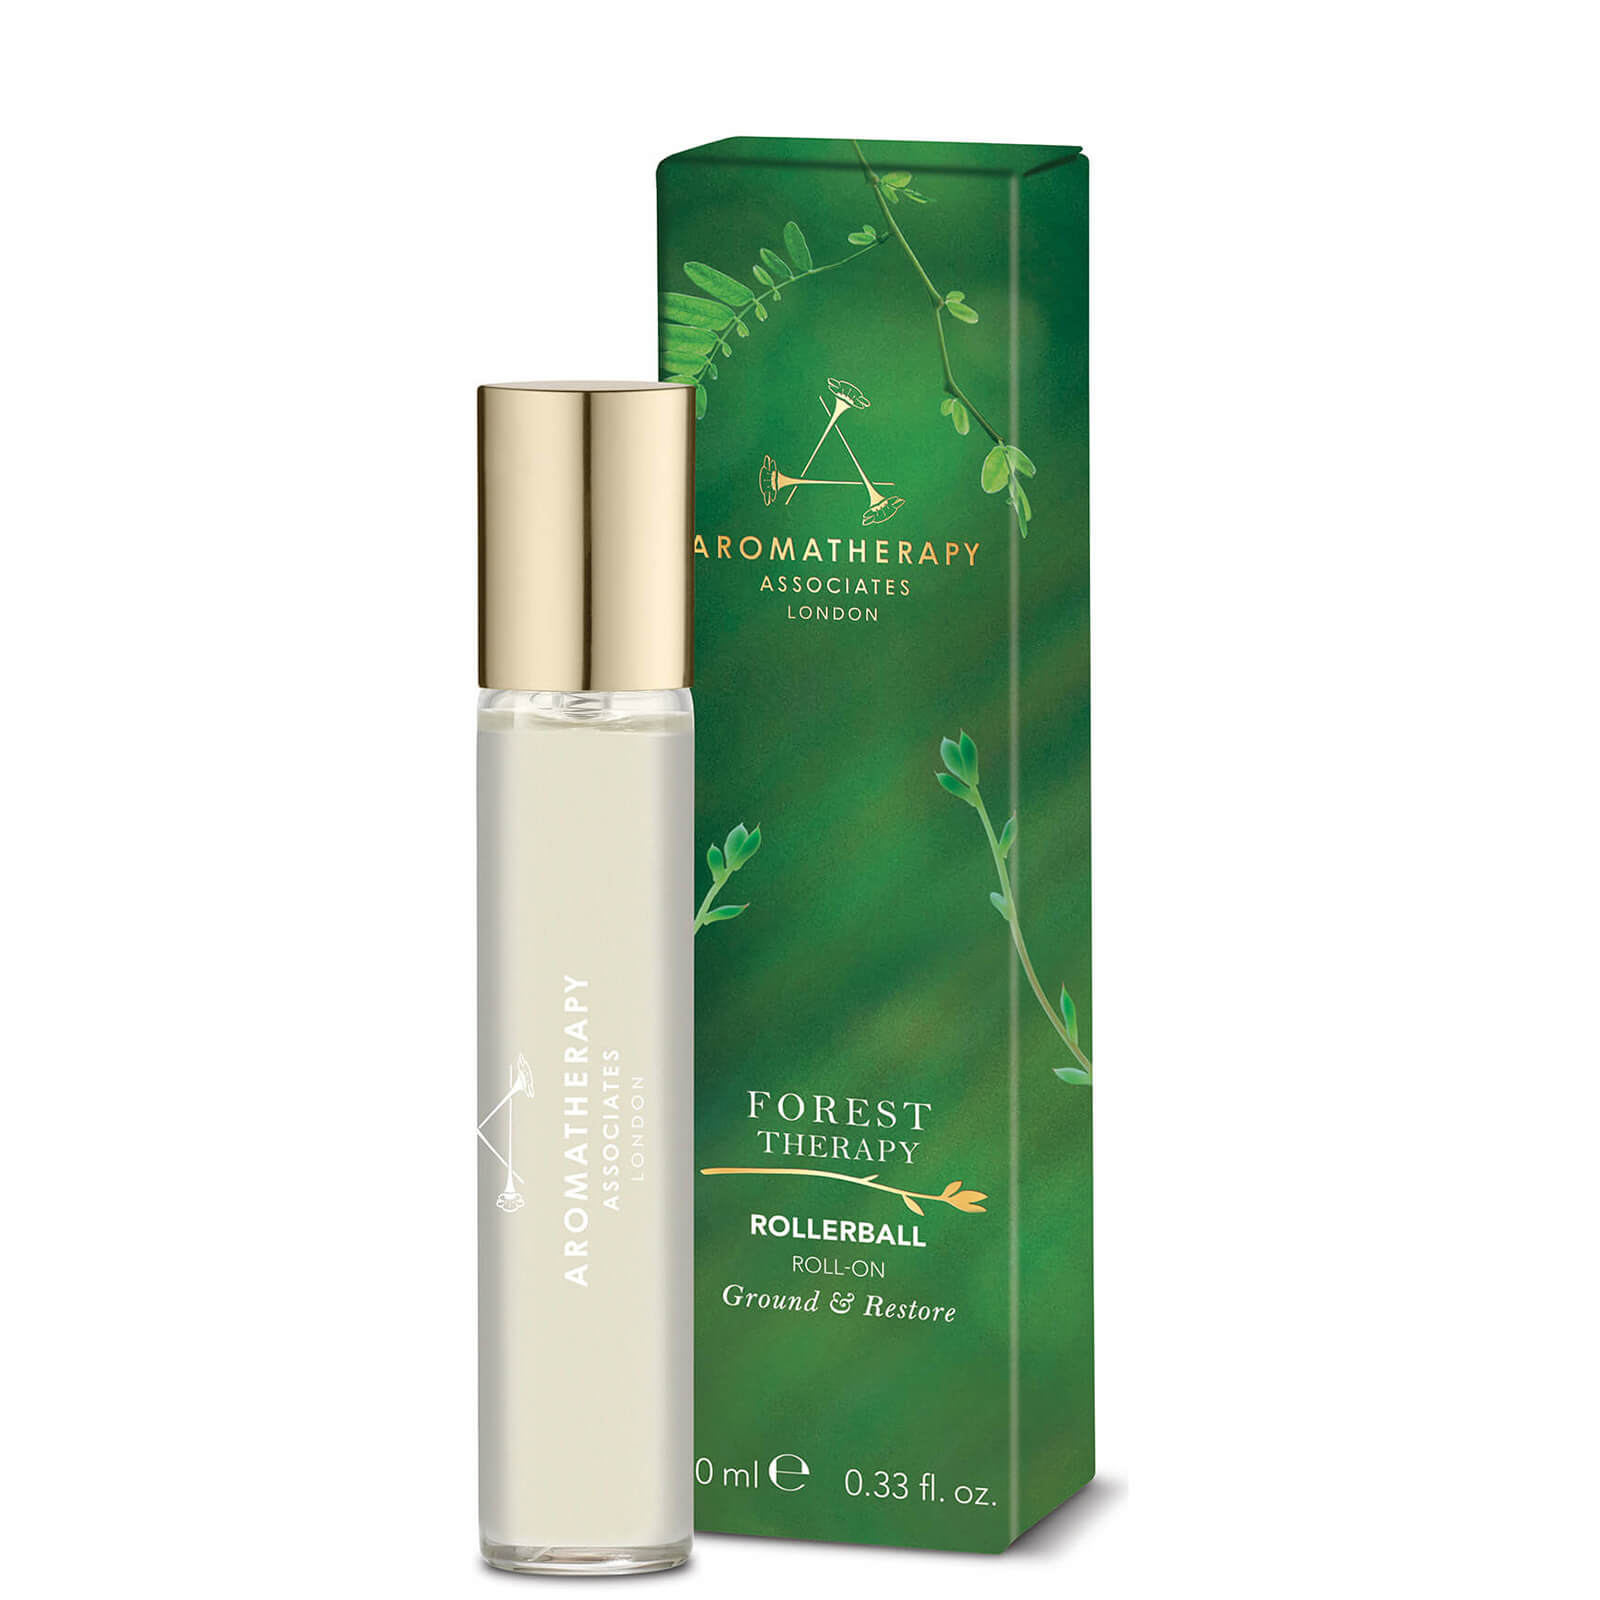 Image of Aromatherapy Associates Forest Therapy Rollerball 10ml